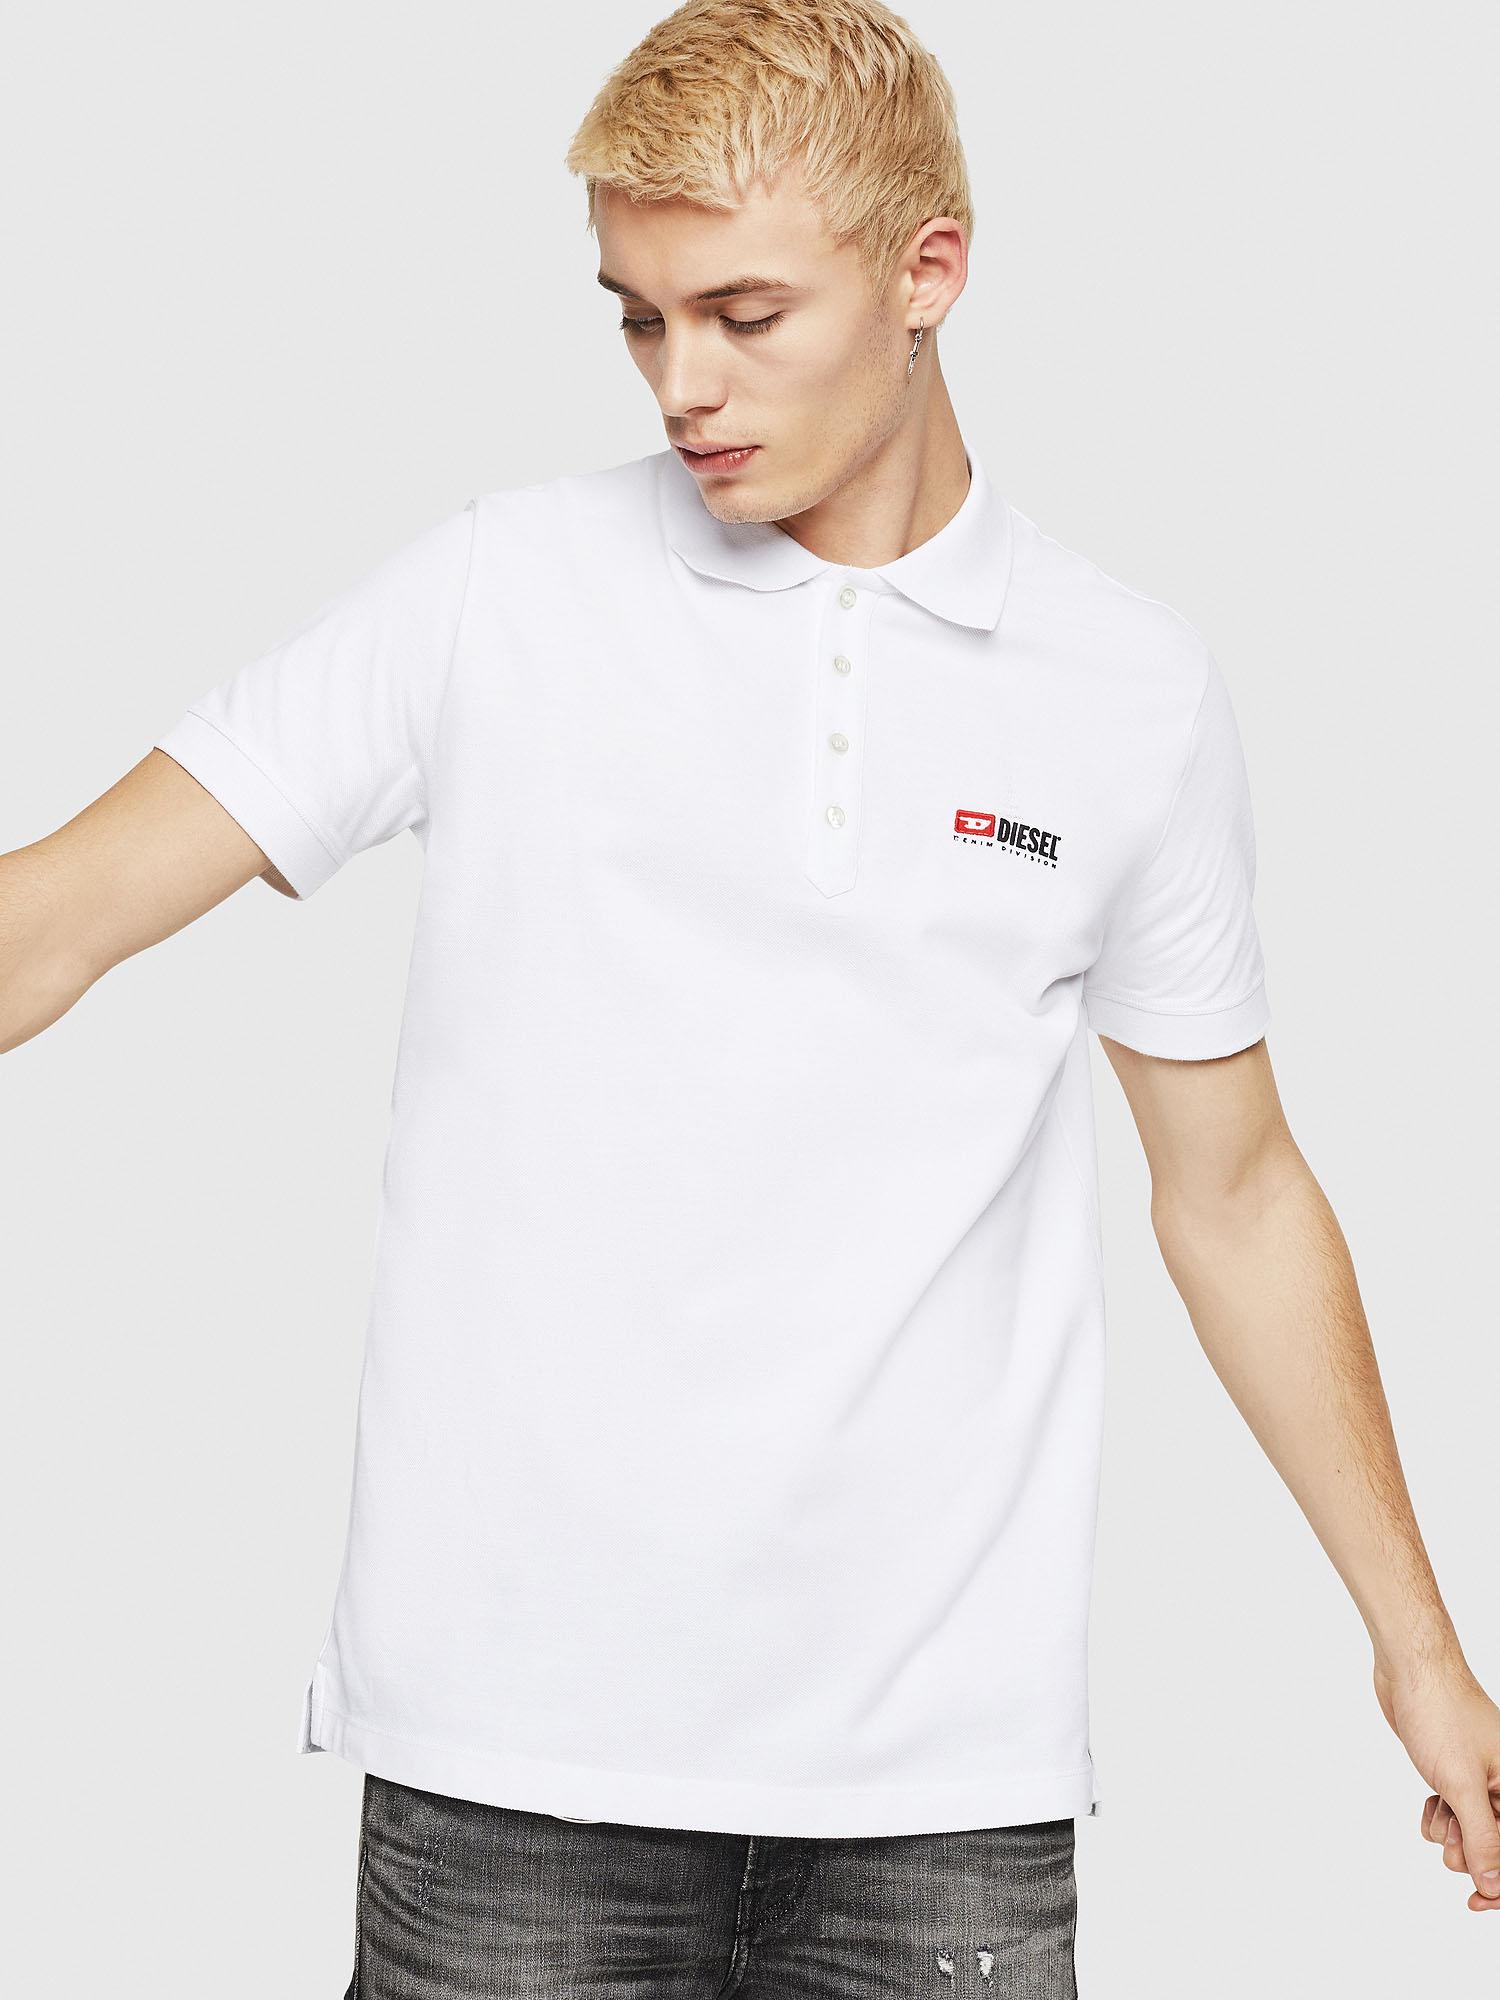 DIESEL Cotton Logo Patch Polo Shirt in White for Men - Save 22% - Lyst